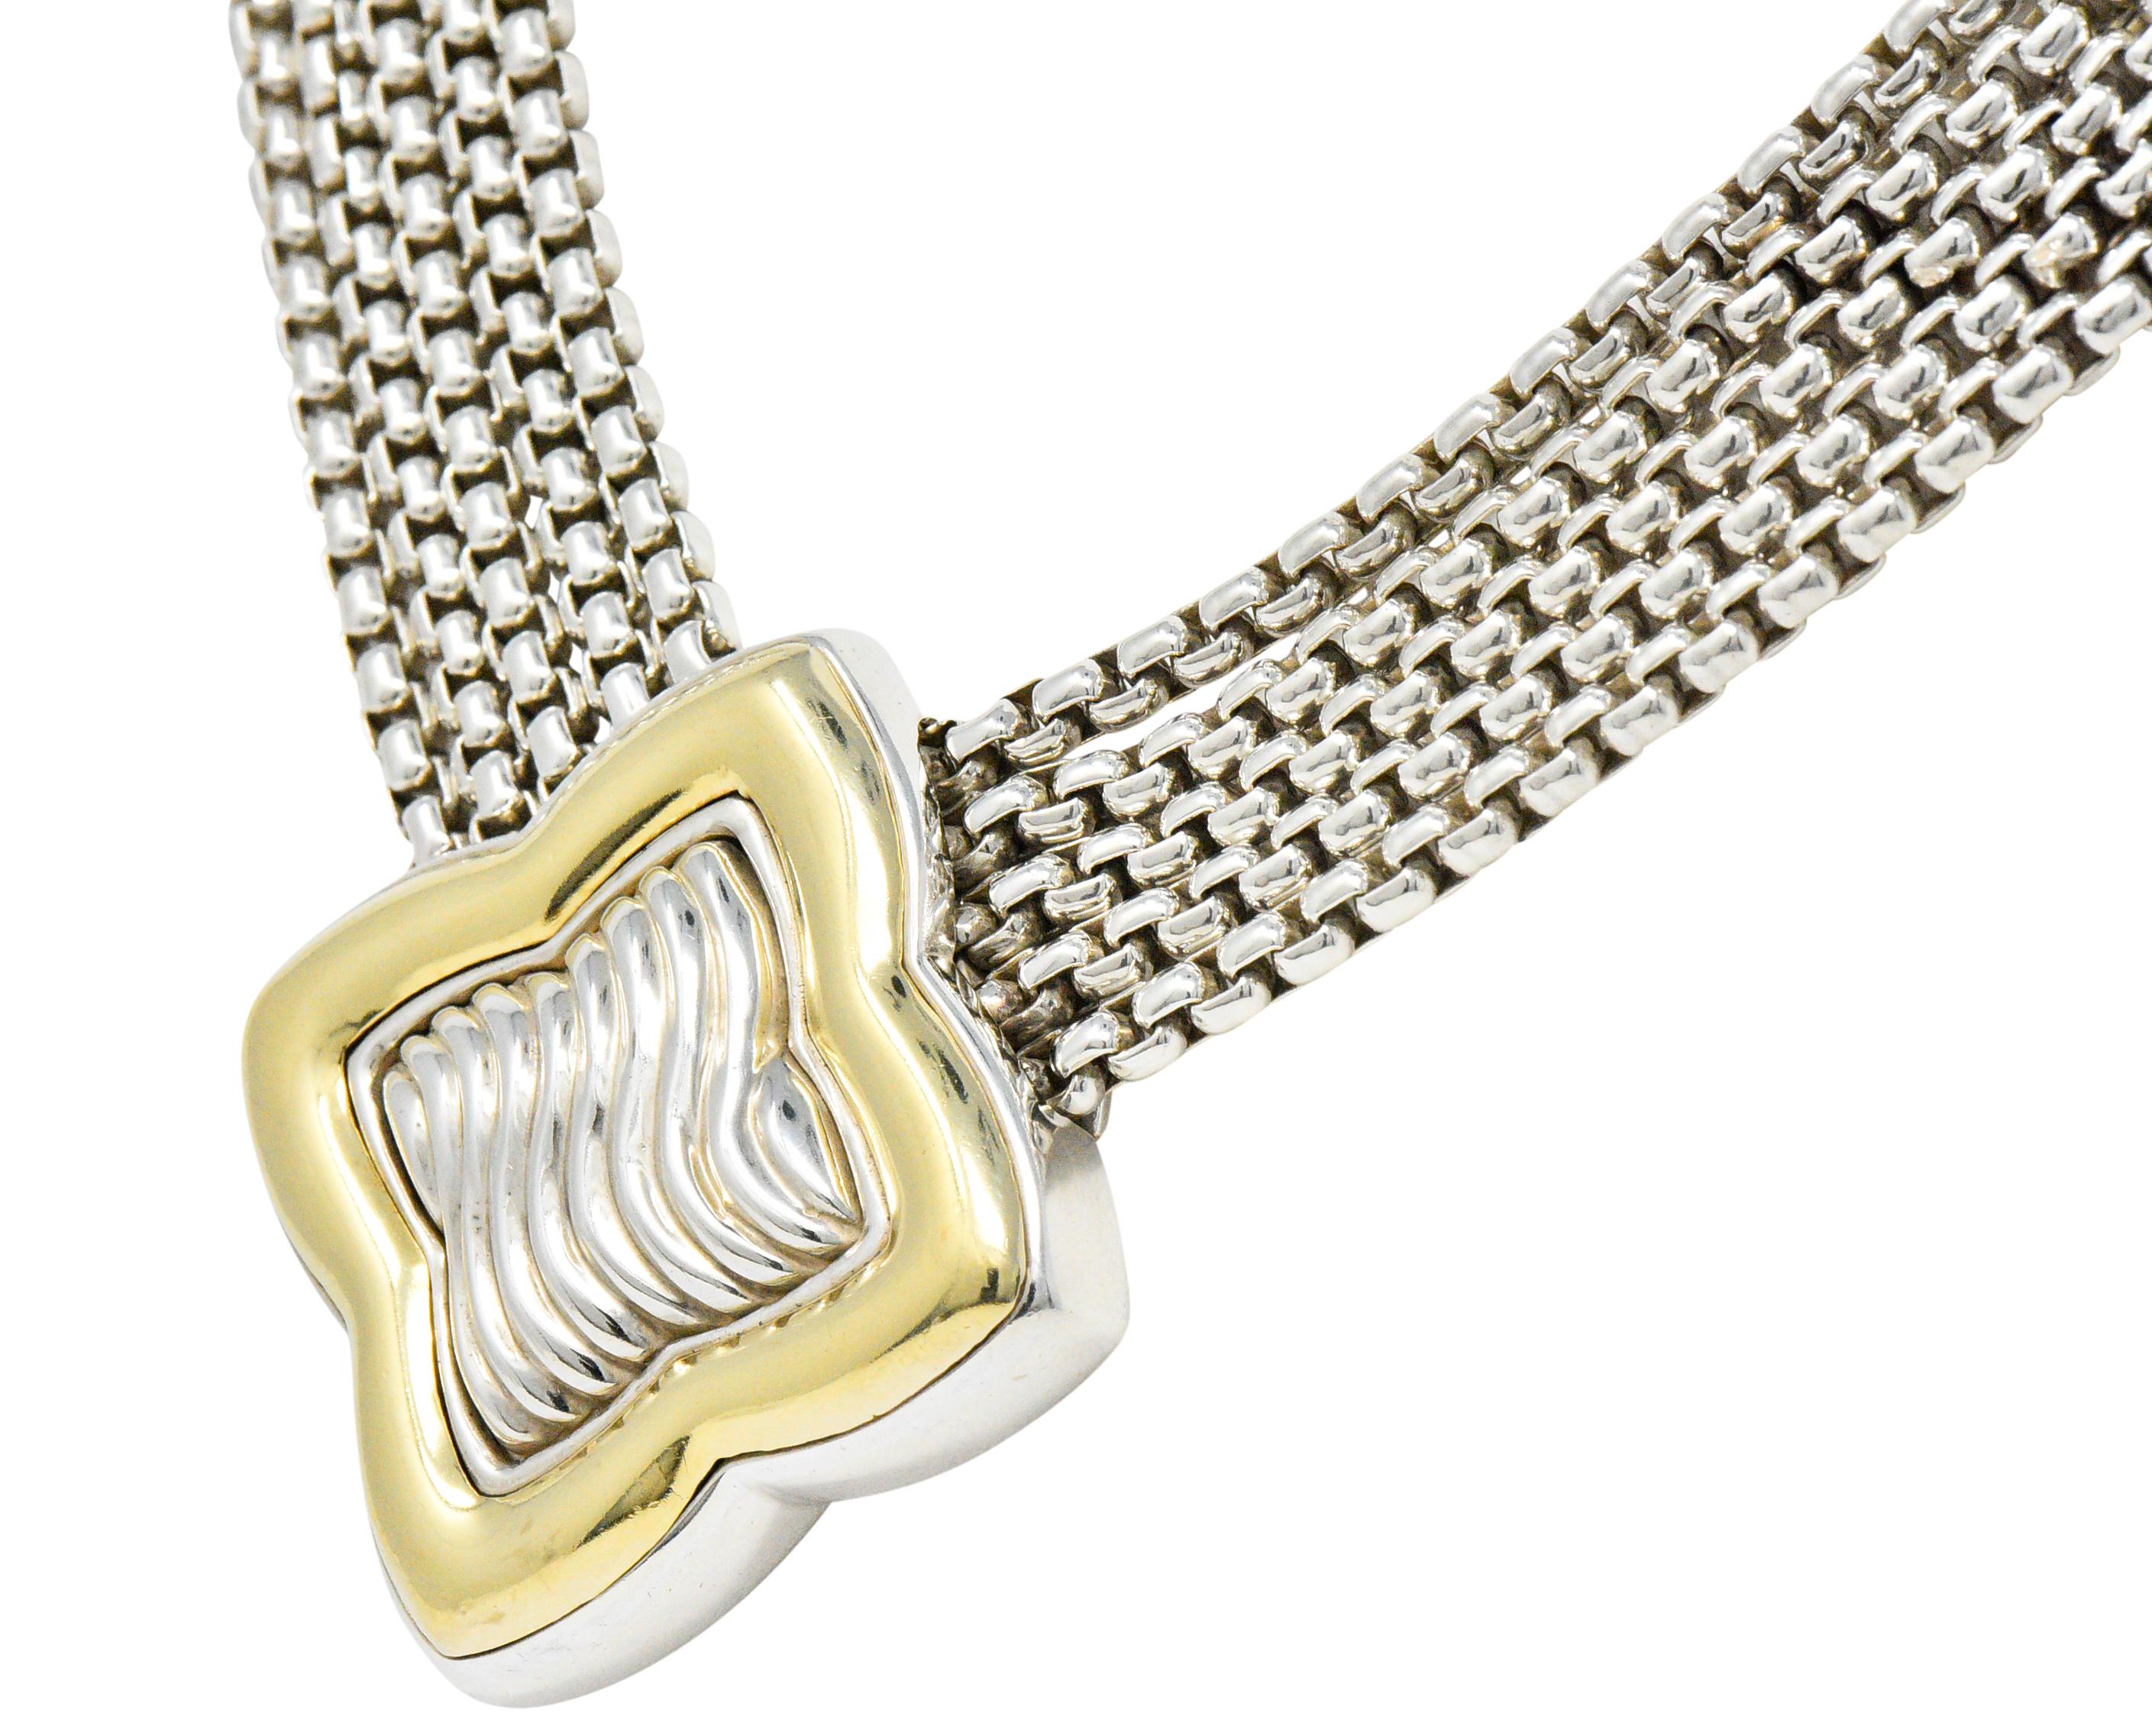 Multi-strand necklace centers a large quatrefoil shaped station with deeply ridged silver 
surrounded by a high polished gold bezel

Suspended by five strands of silver box chain

Completed by twisted cable motif endcaps and linked T-bar toggle